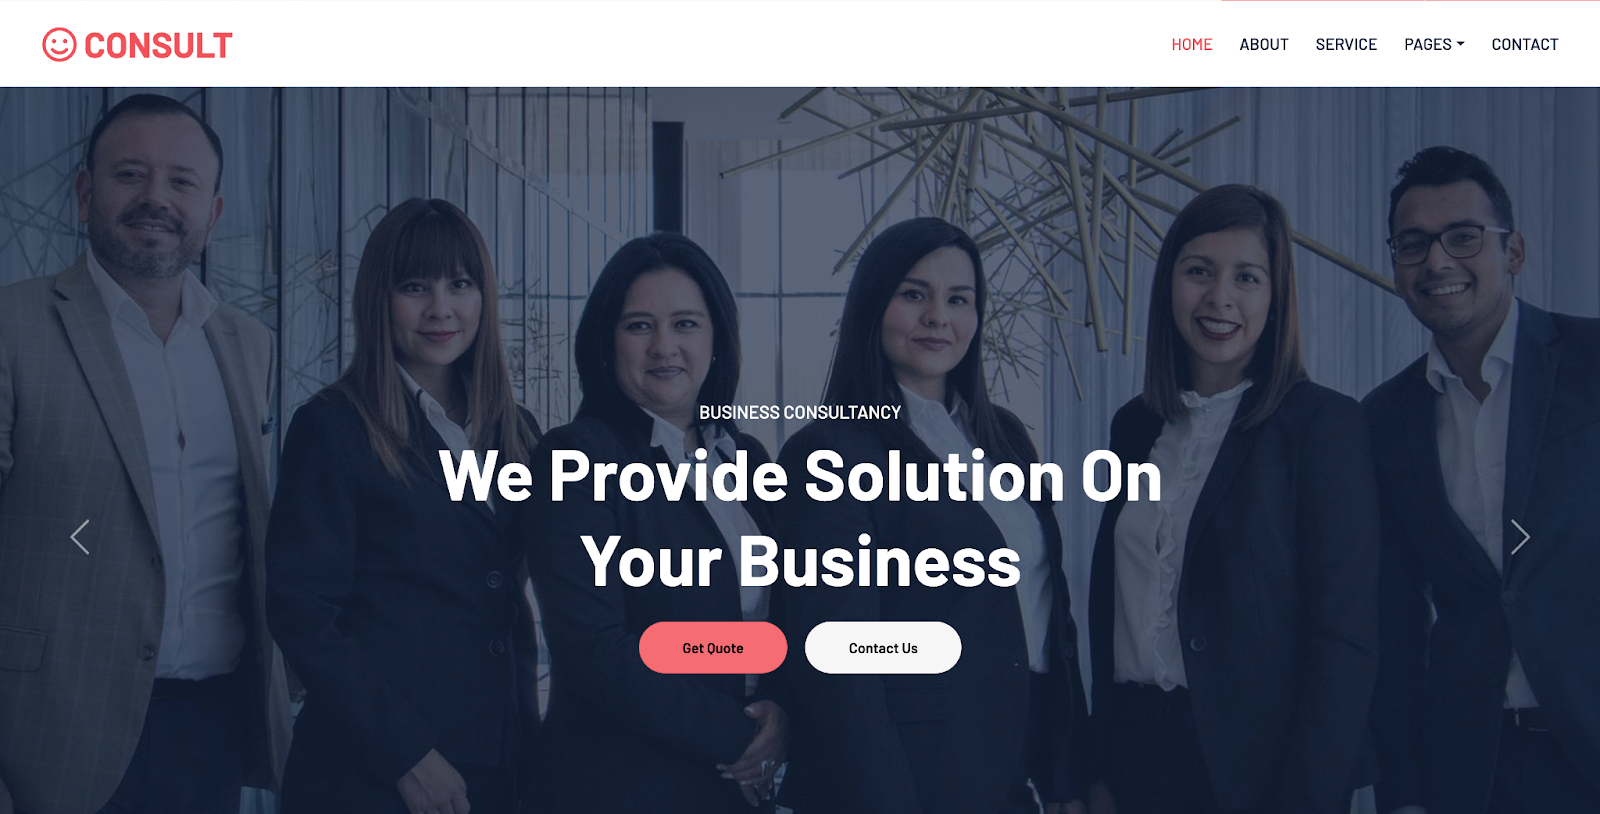 Get the Consult template and create a responsive consulting agency Website with no time at all